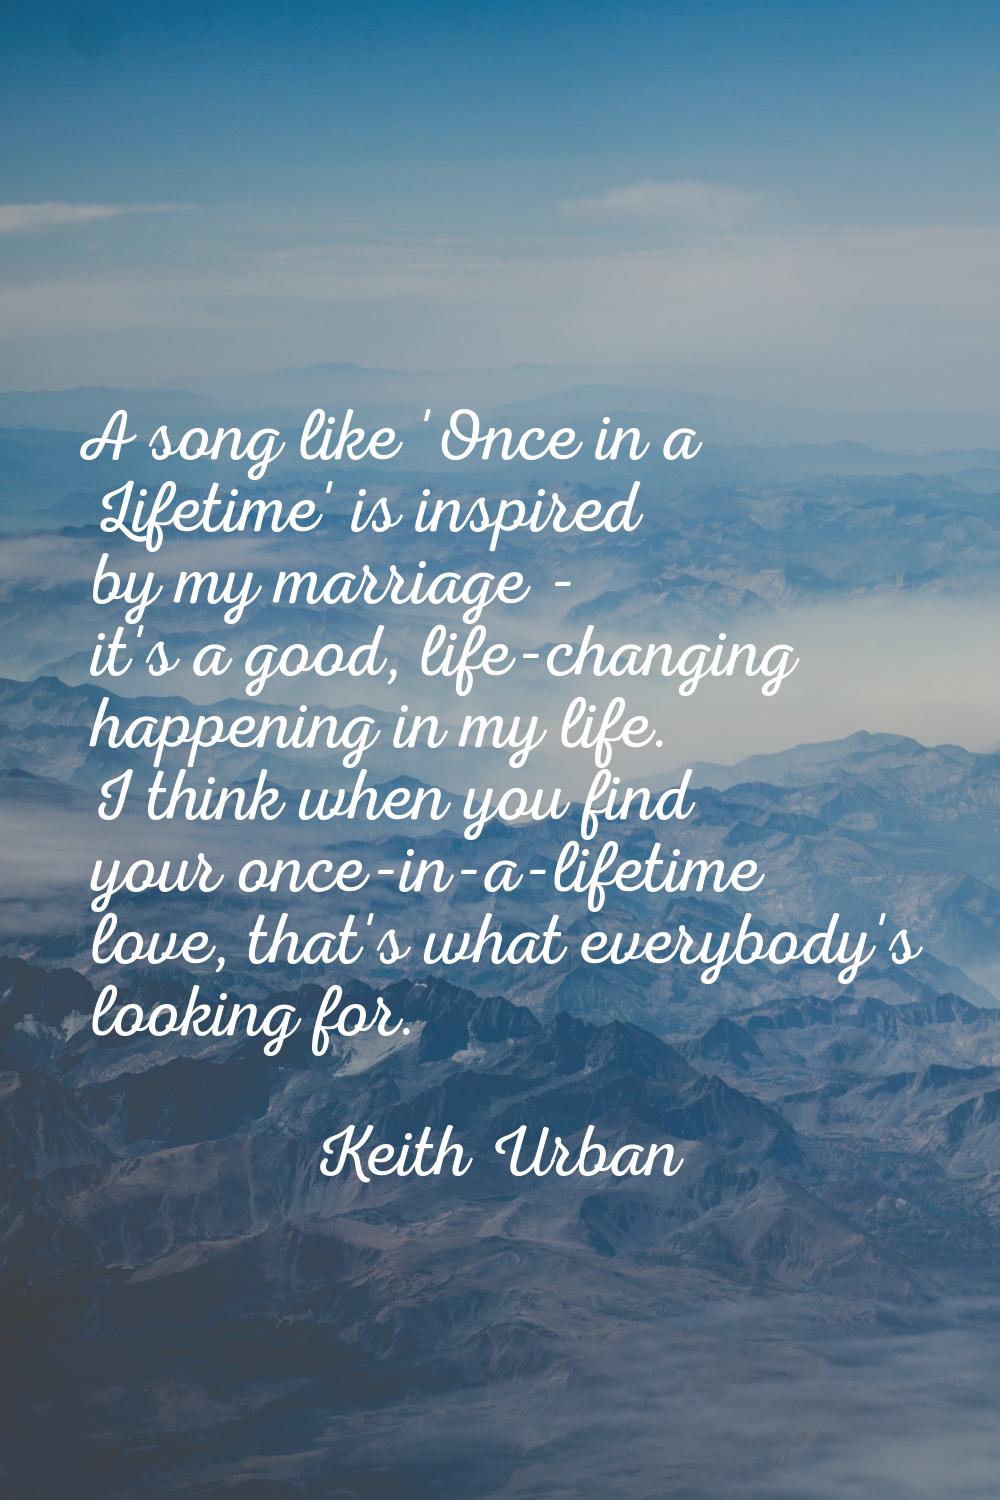 A song like 'Once in a Lifetime' is inspired by my marriage - it's a good, life-changing happening 